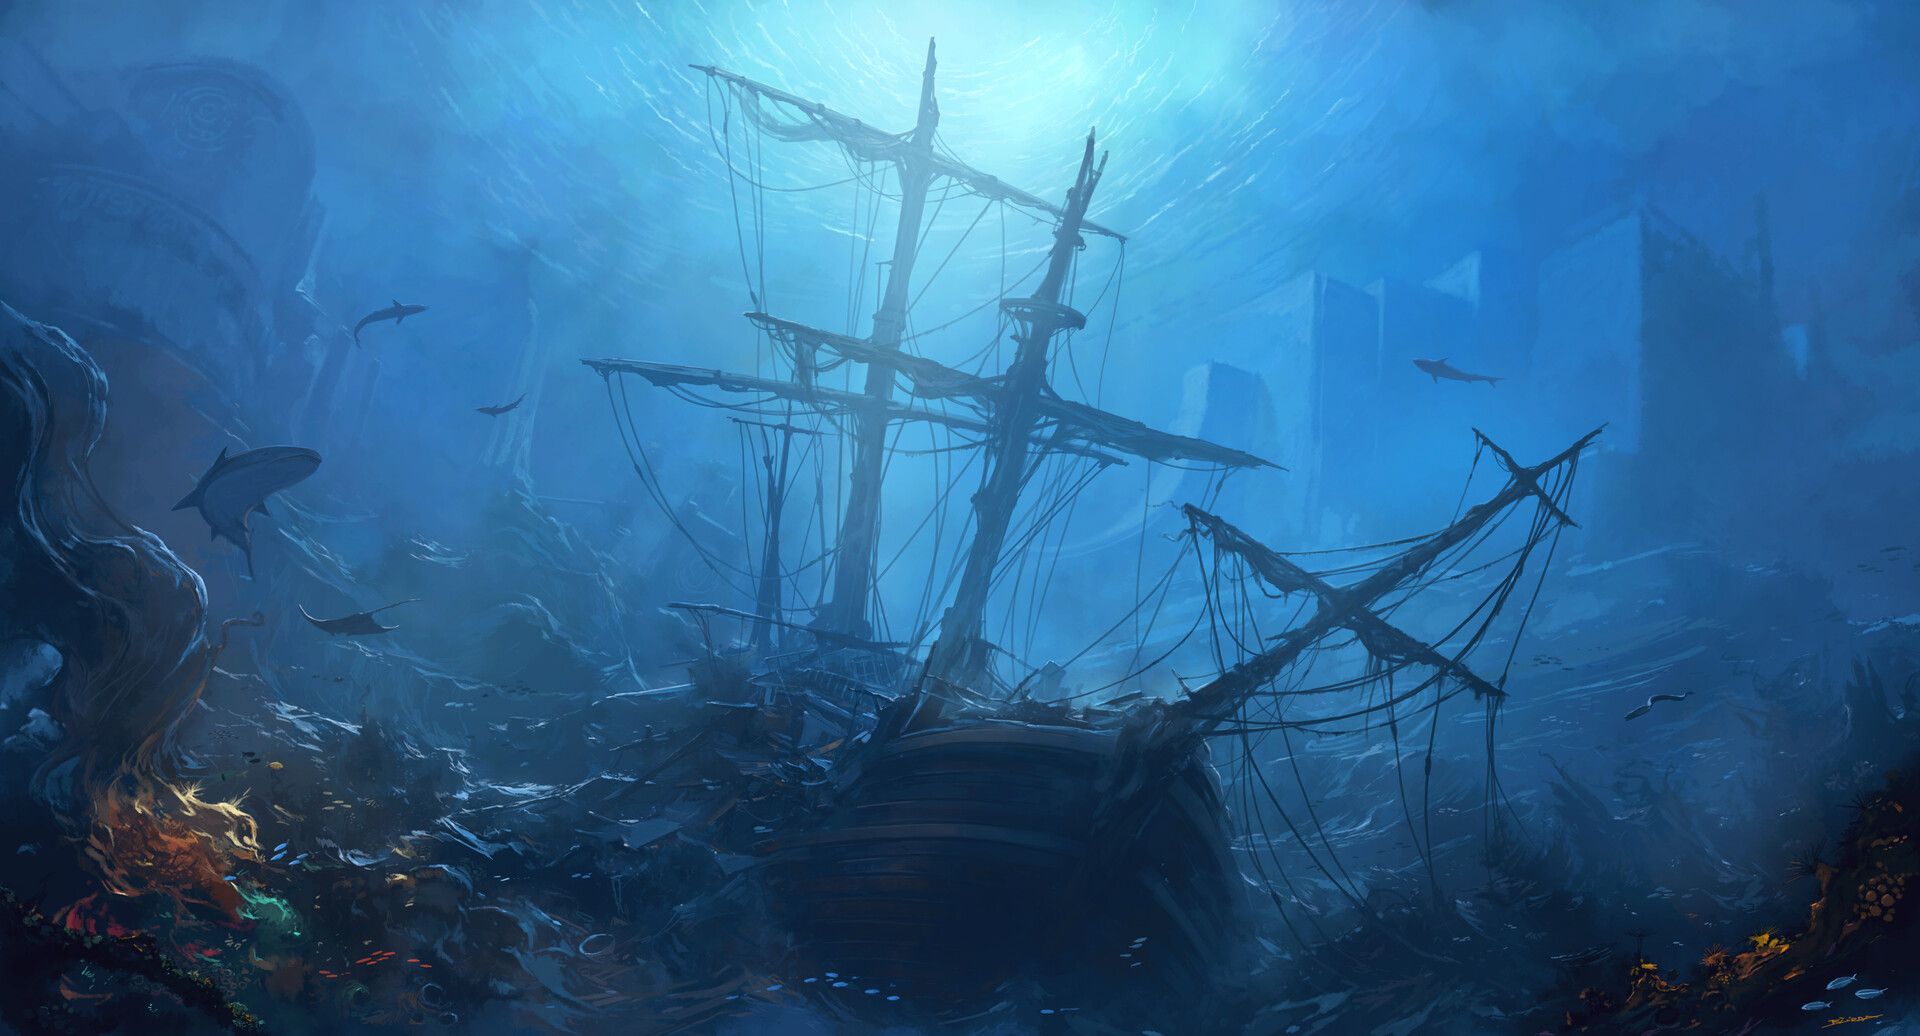 A Great Pirate Haven Sunk Into the Sea